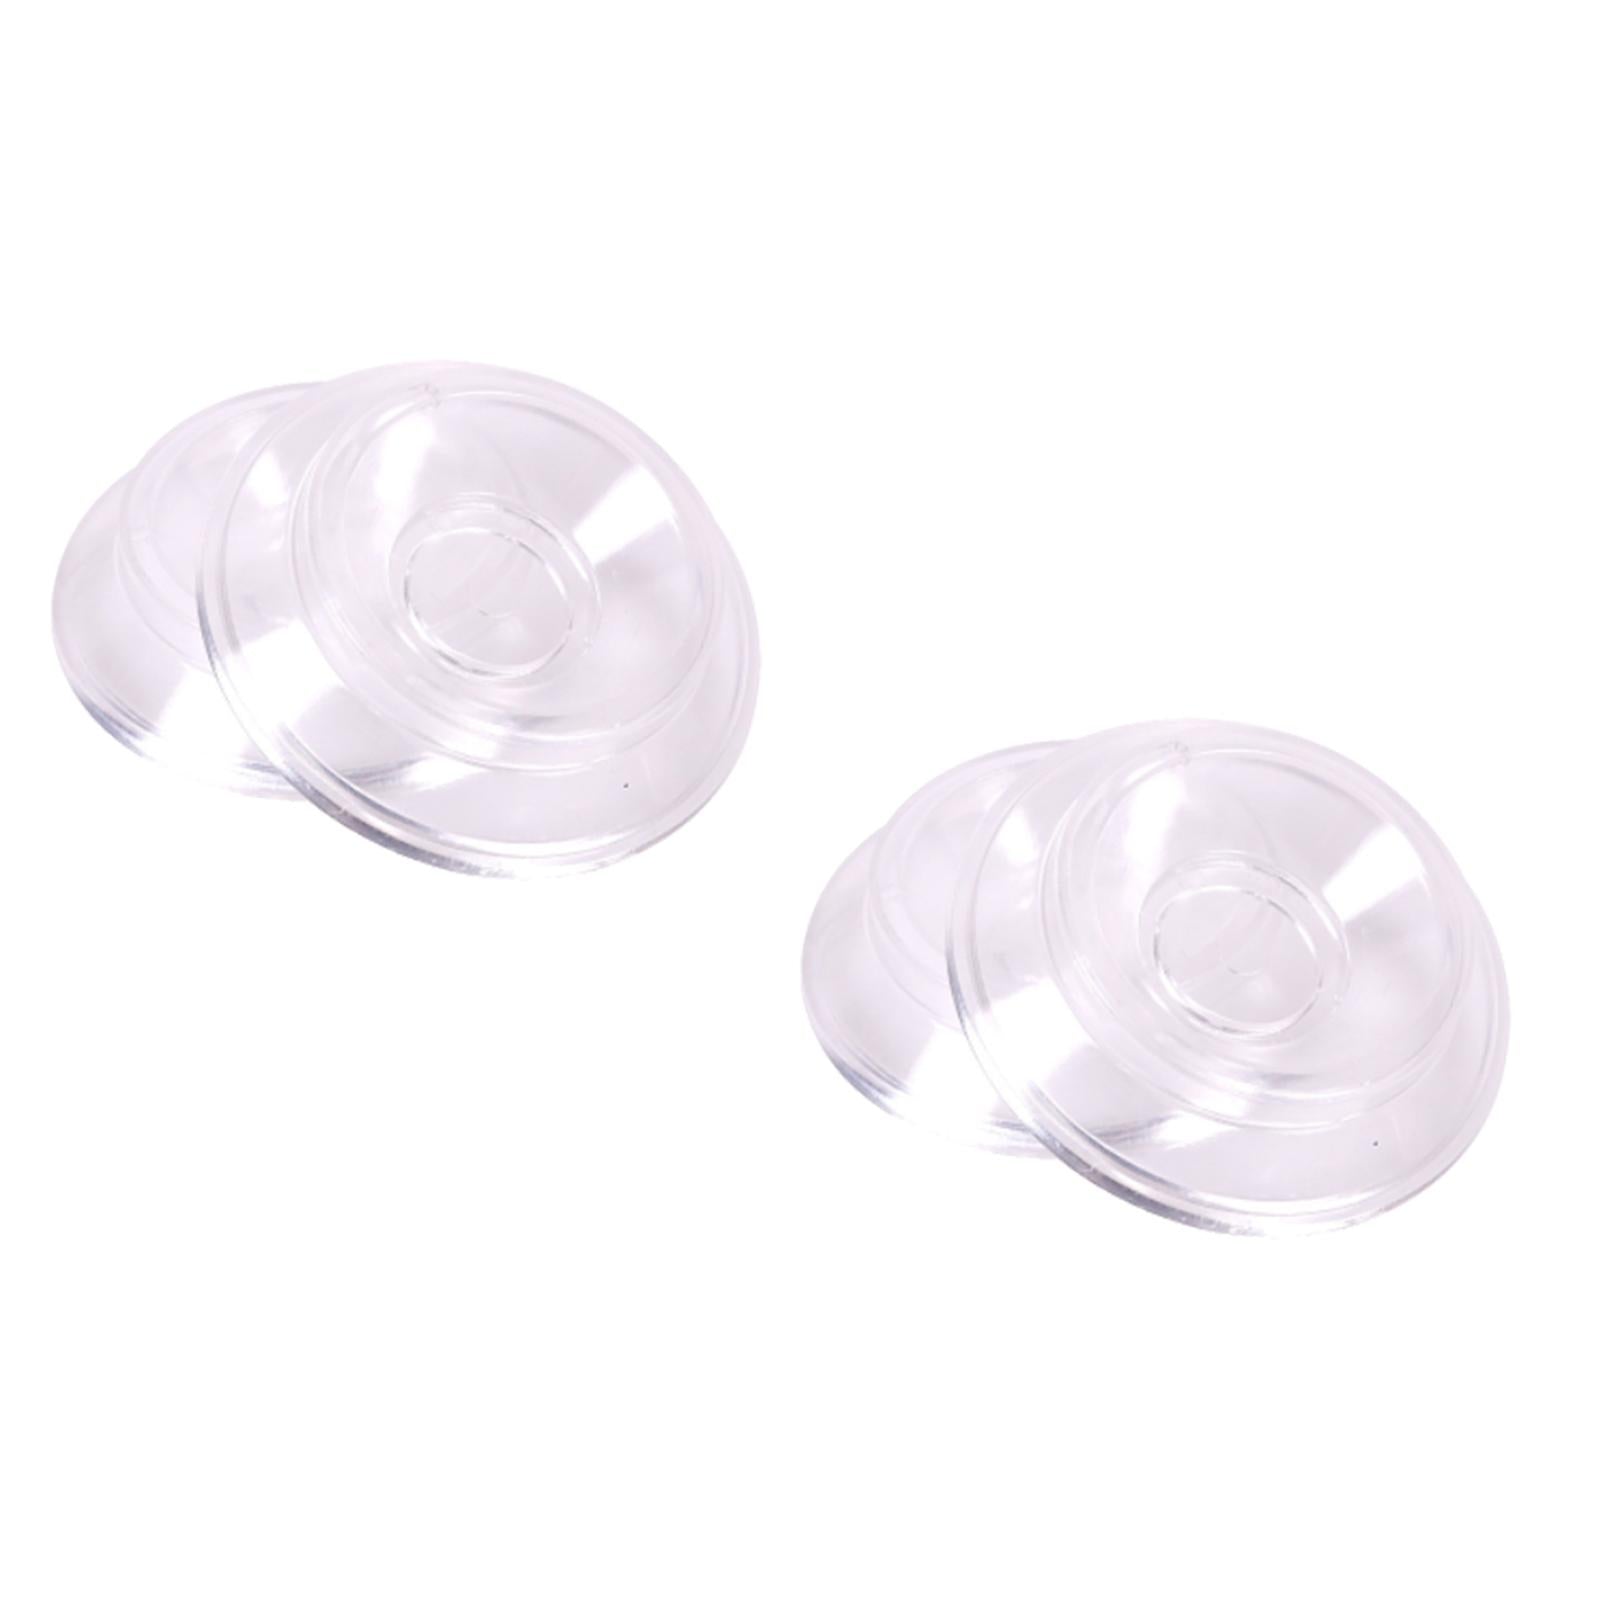 4x Piano Caster Cups High Quality Protection Solid Upright Premium ABS Clear